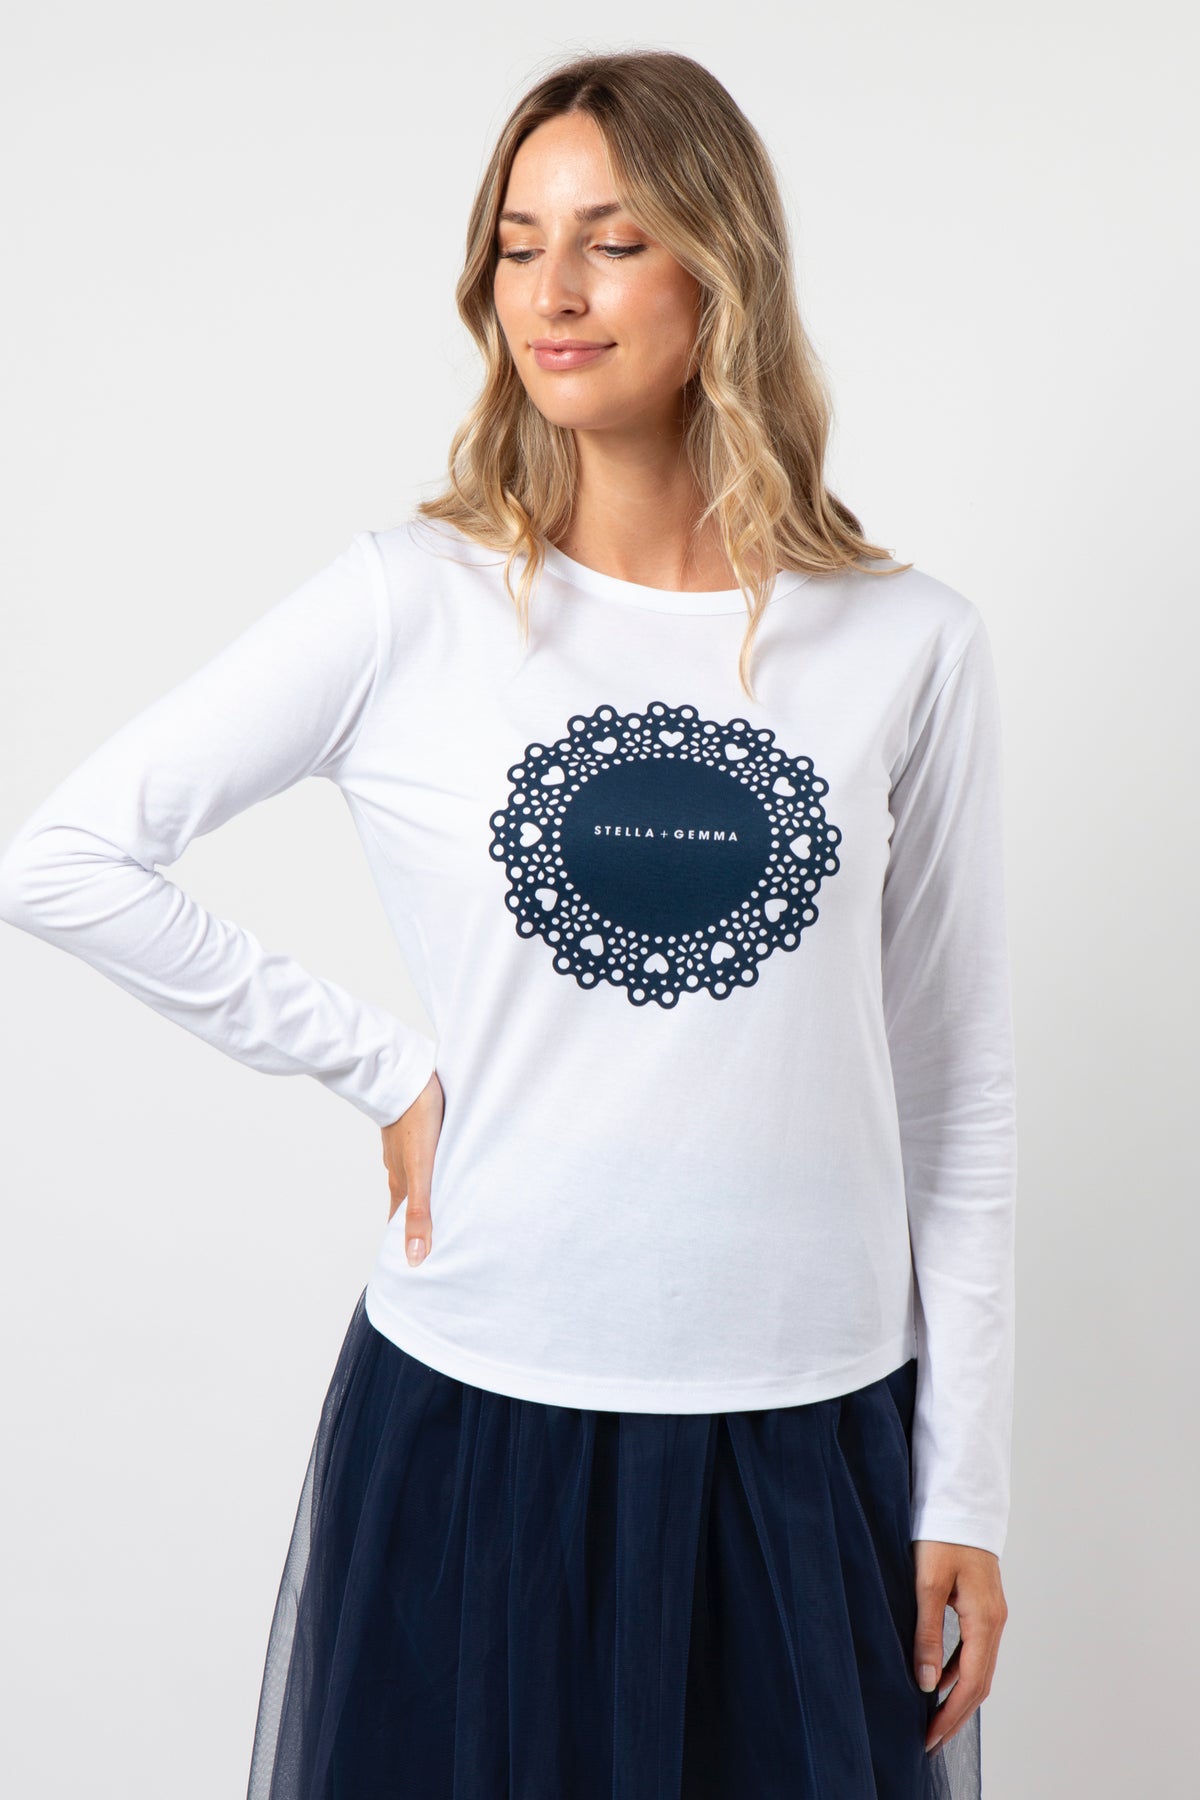 LS Tee White With Navy Doily